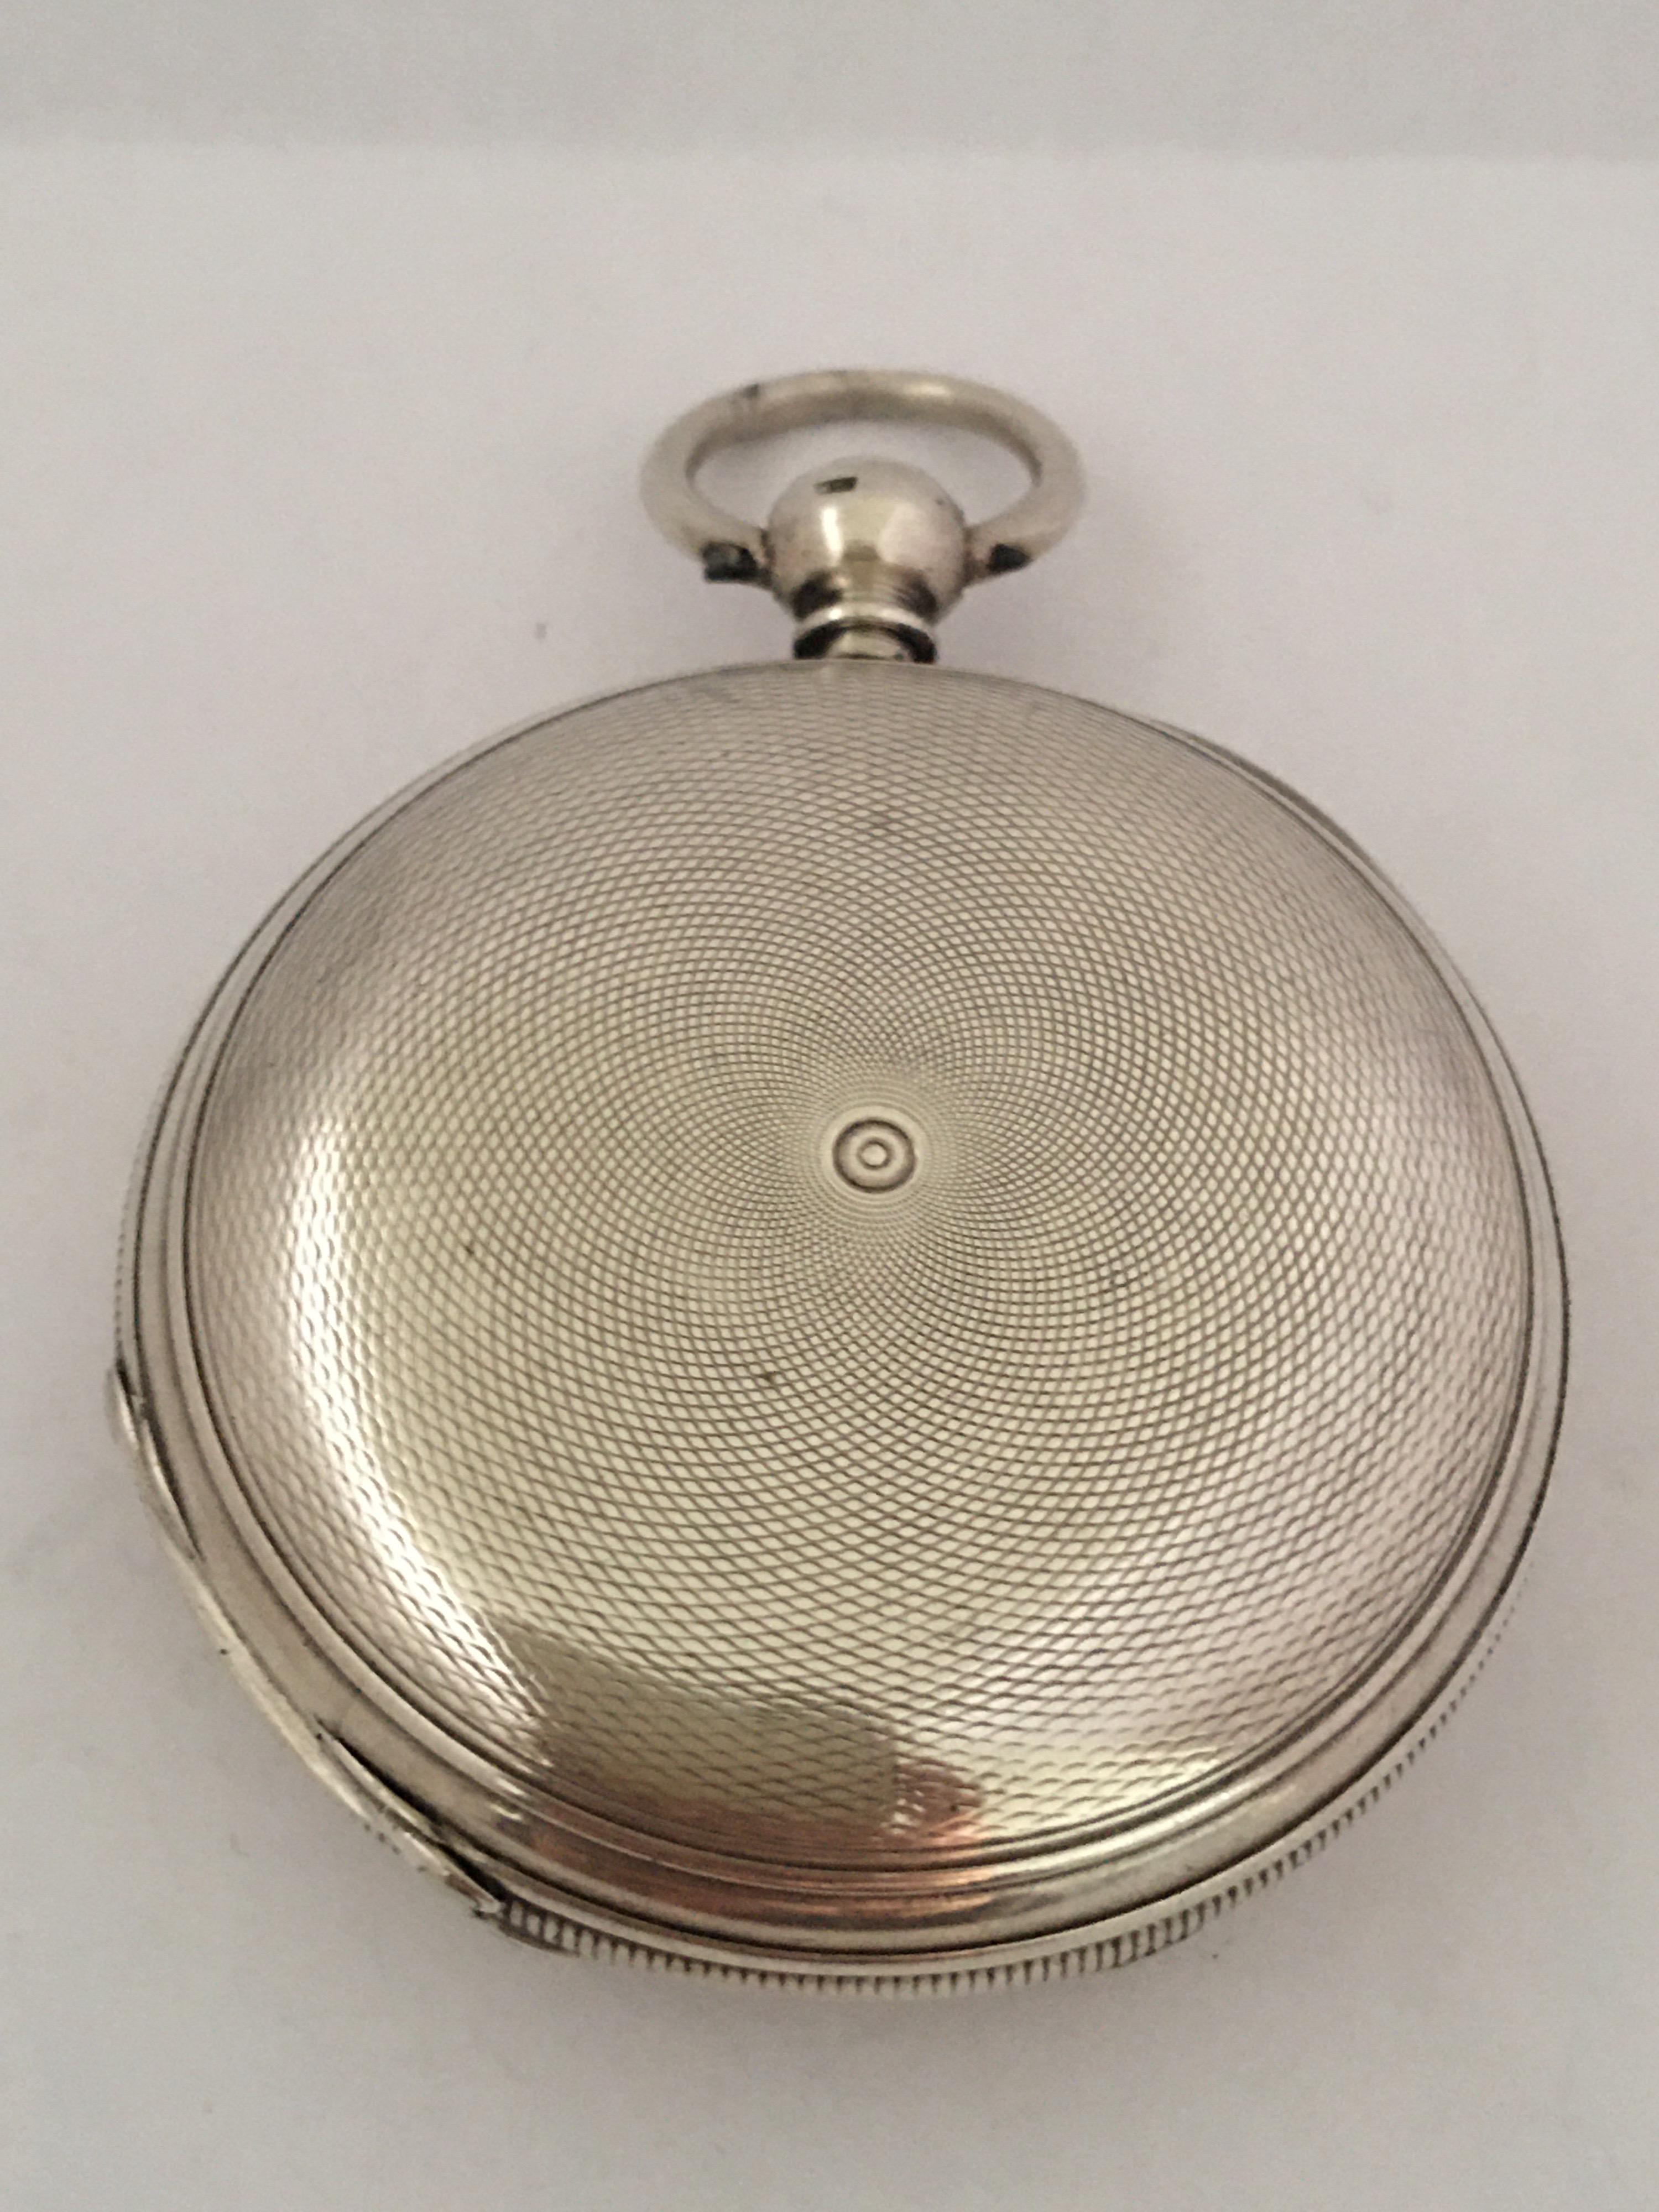 This Charming 51mm diameter good quality English Lever Fusee Silver Pocket watch is working and it is ticking well. It comes with a winding Key.

This watch shows a sign of aged and wearing, with its chipped and a hairline crack on the enamel dial